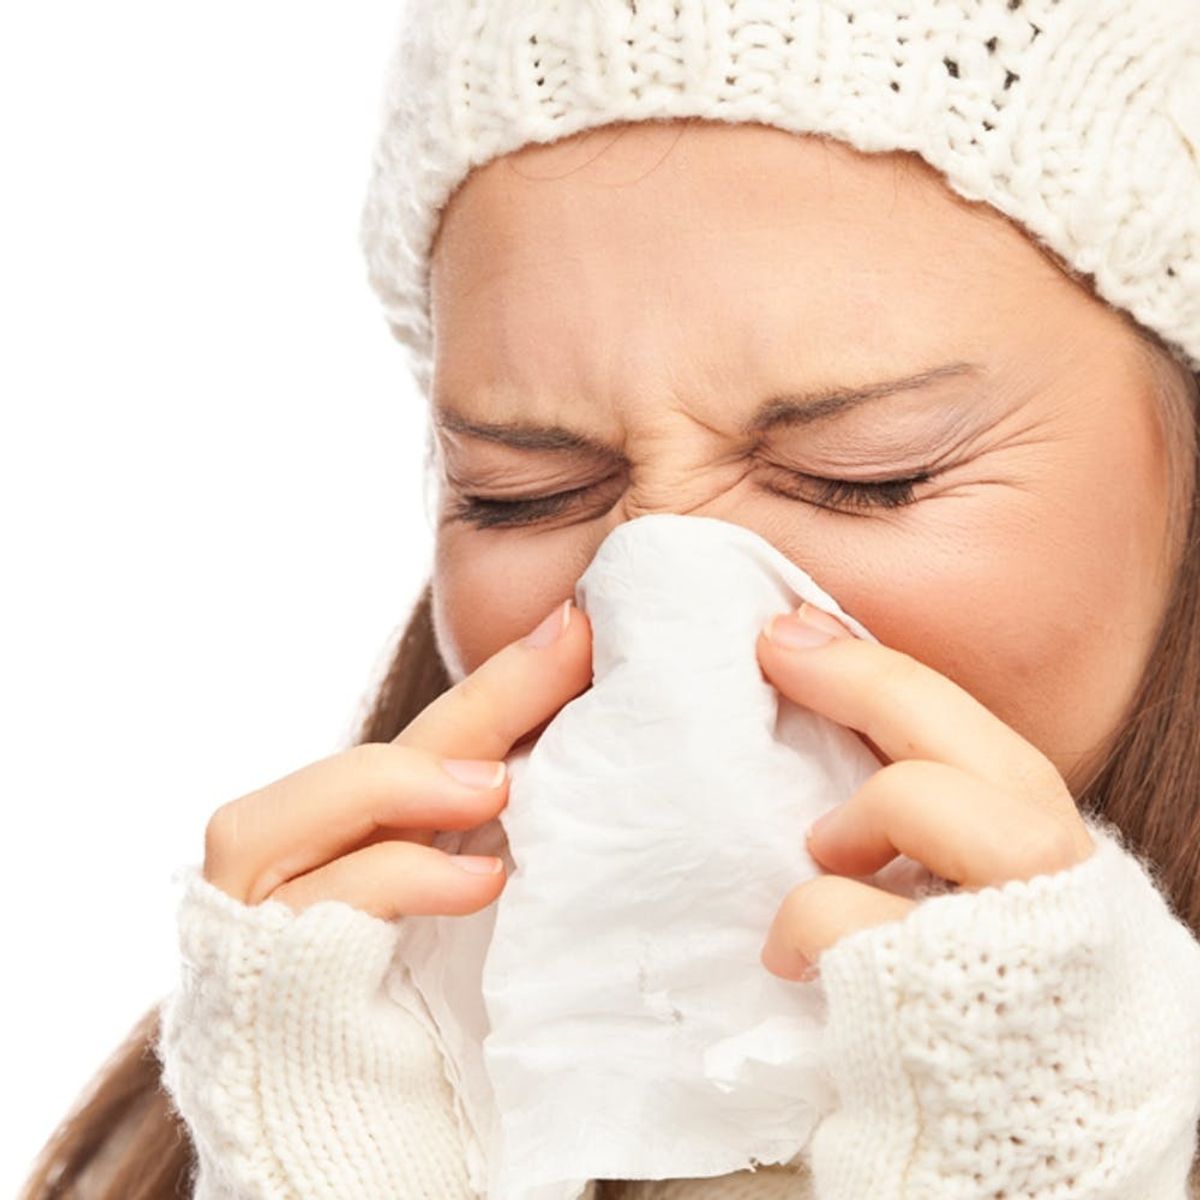 This Study Has News You Need to Know Before Cold Season